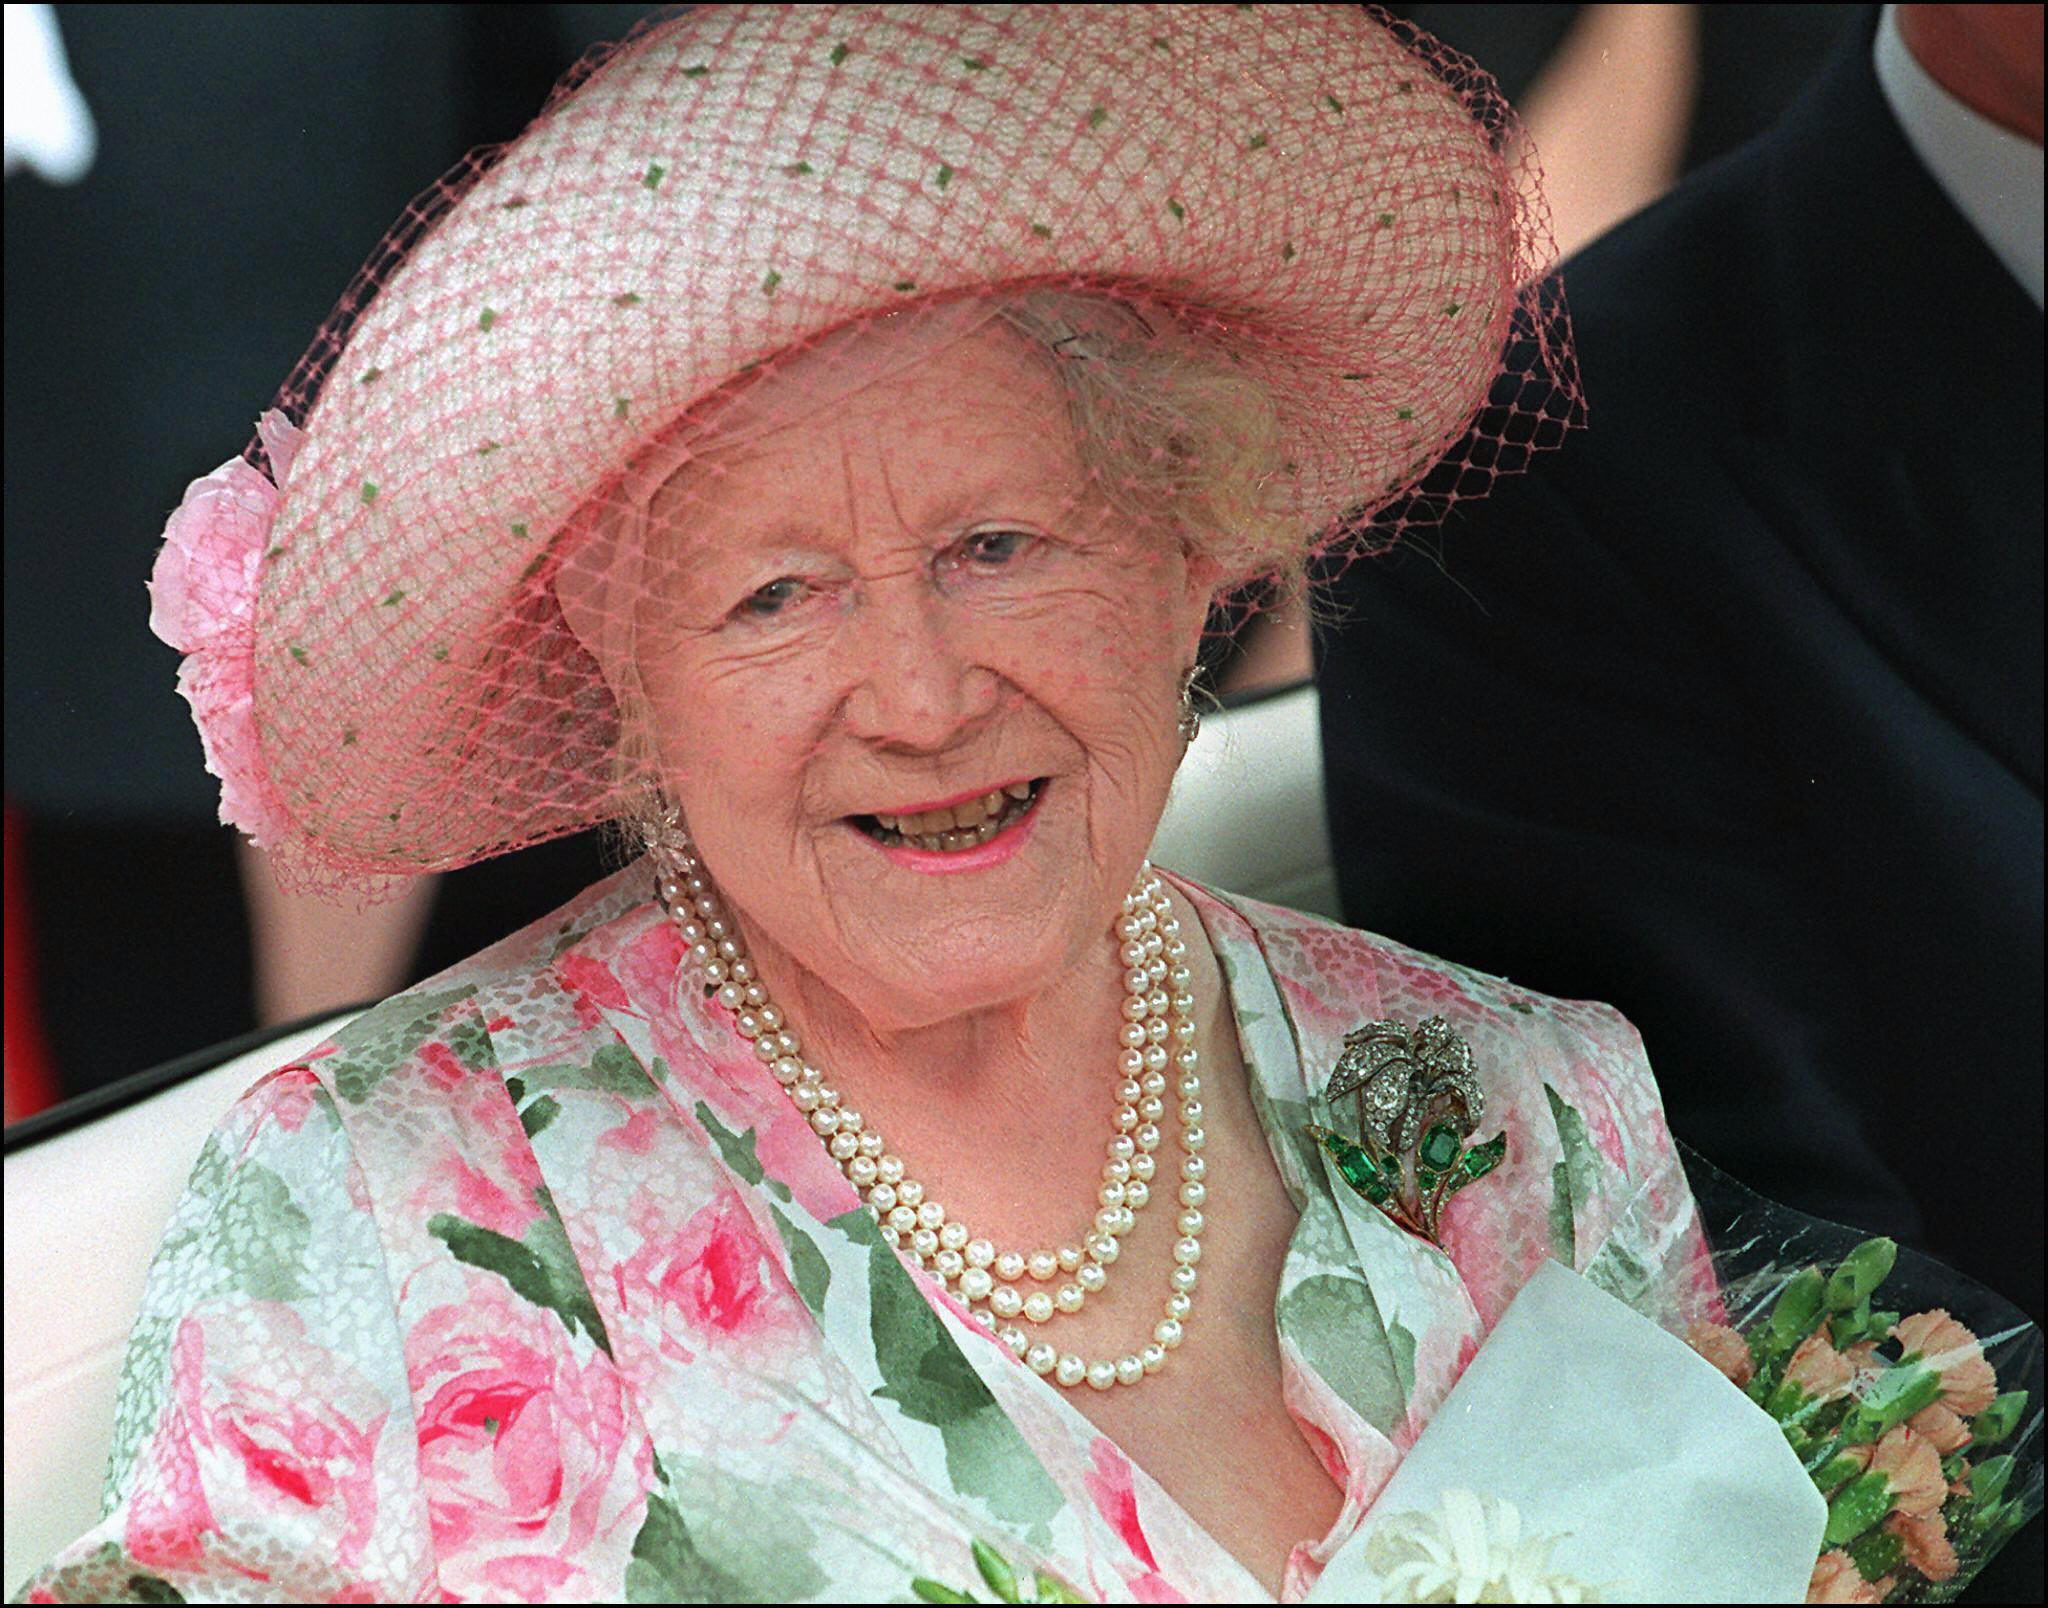 Staff at the castle said the Queen Mother was known to take afternoon naps, usually after her first drink of the day